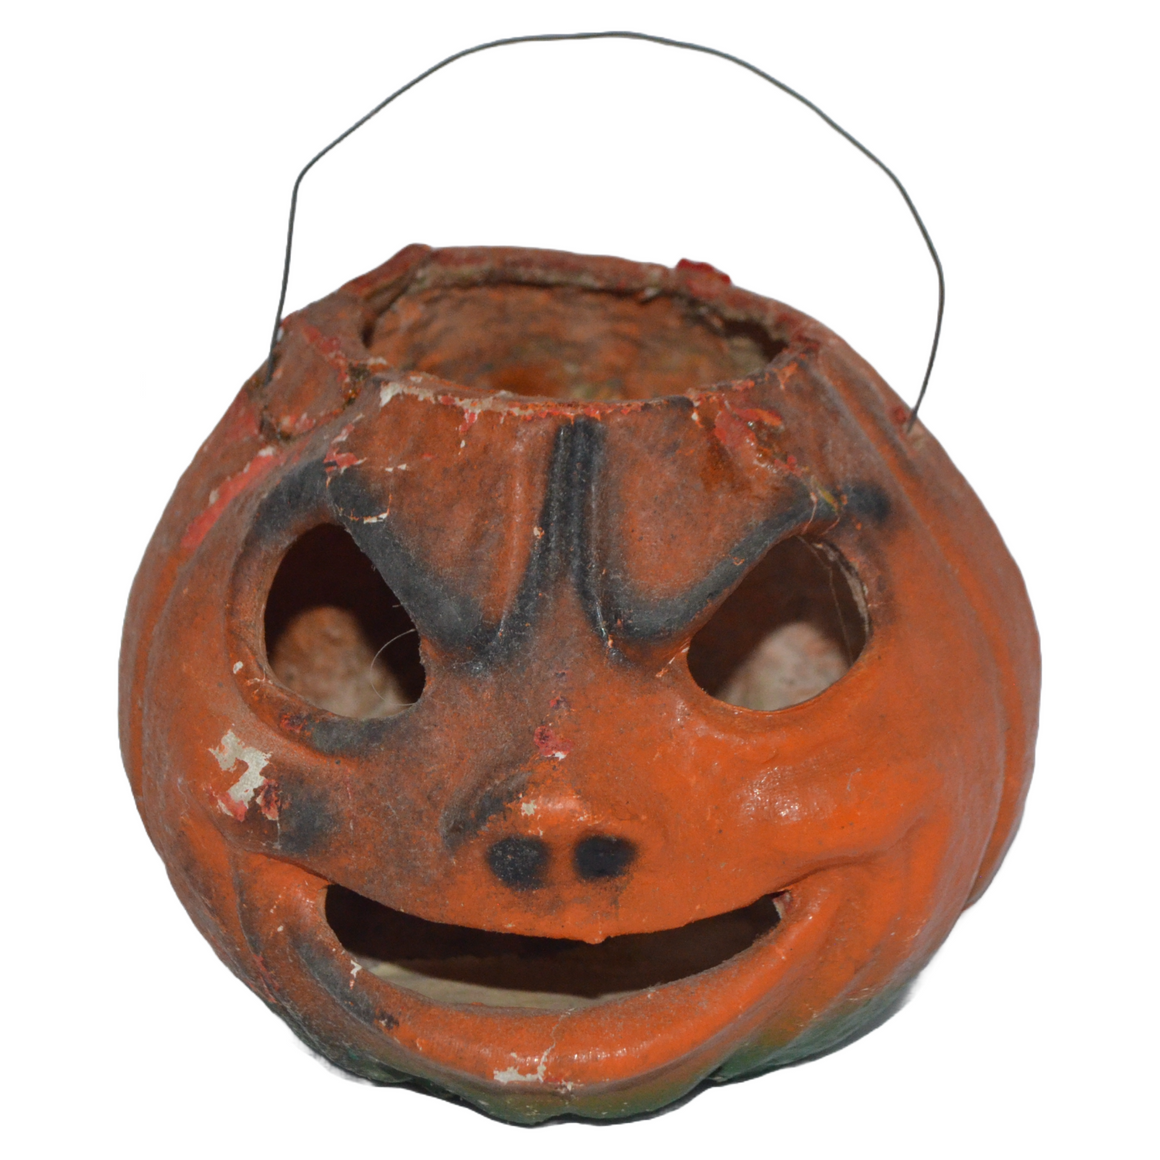 Vintage Jack O' Lantern Paper Mache JOL 1930s Holiday Halloween Decor Scary Candy Container